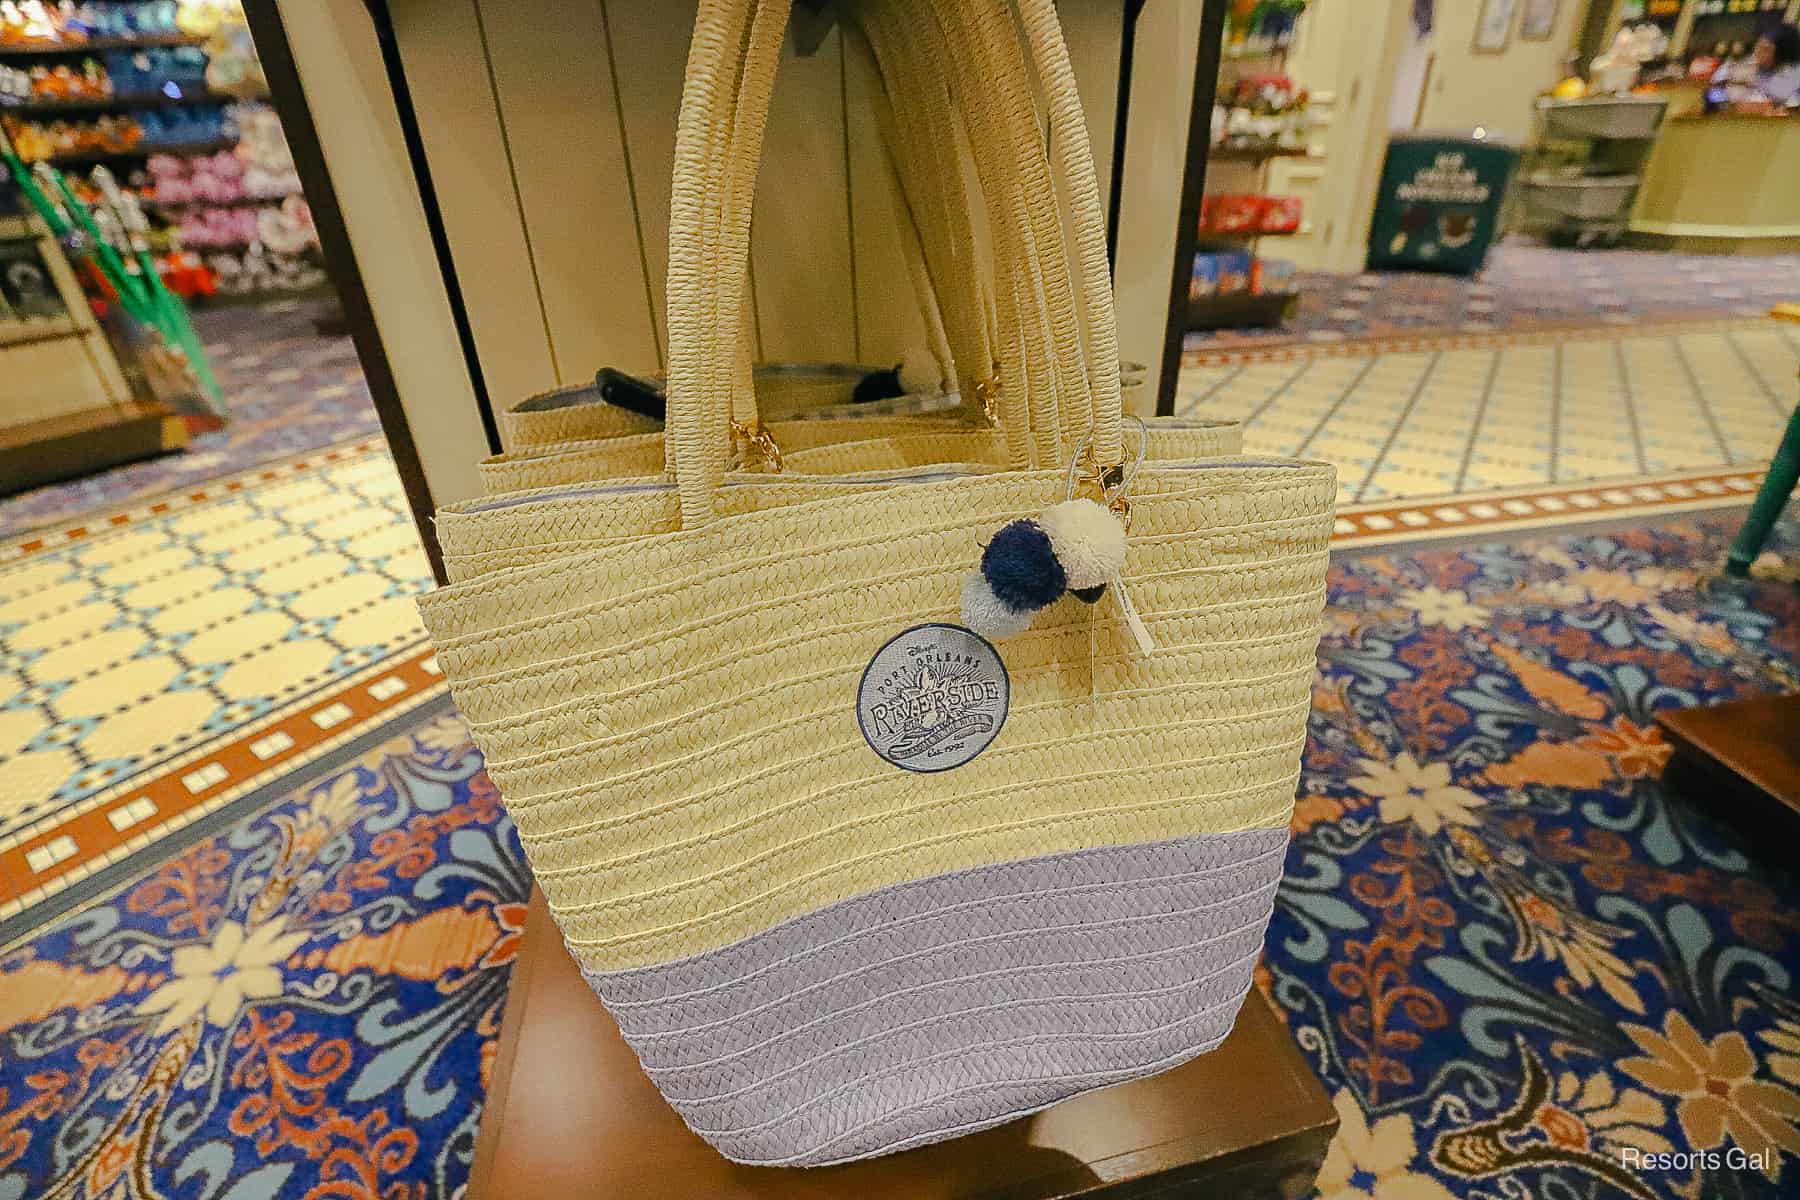 a blue and straw bag with the Port Orleans Riverside logo 